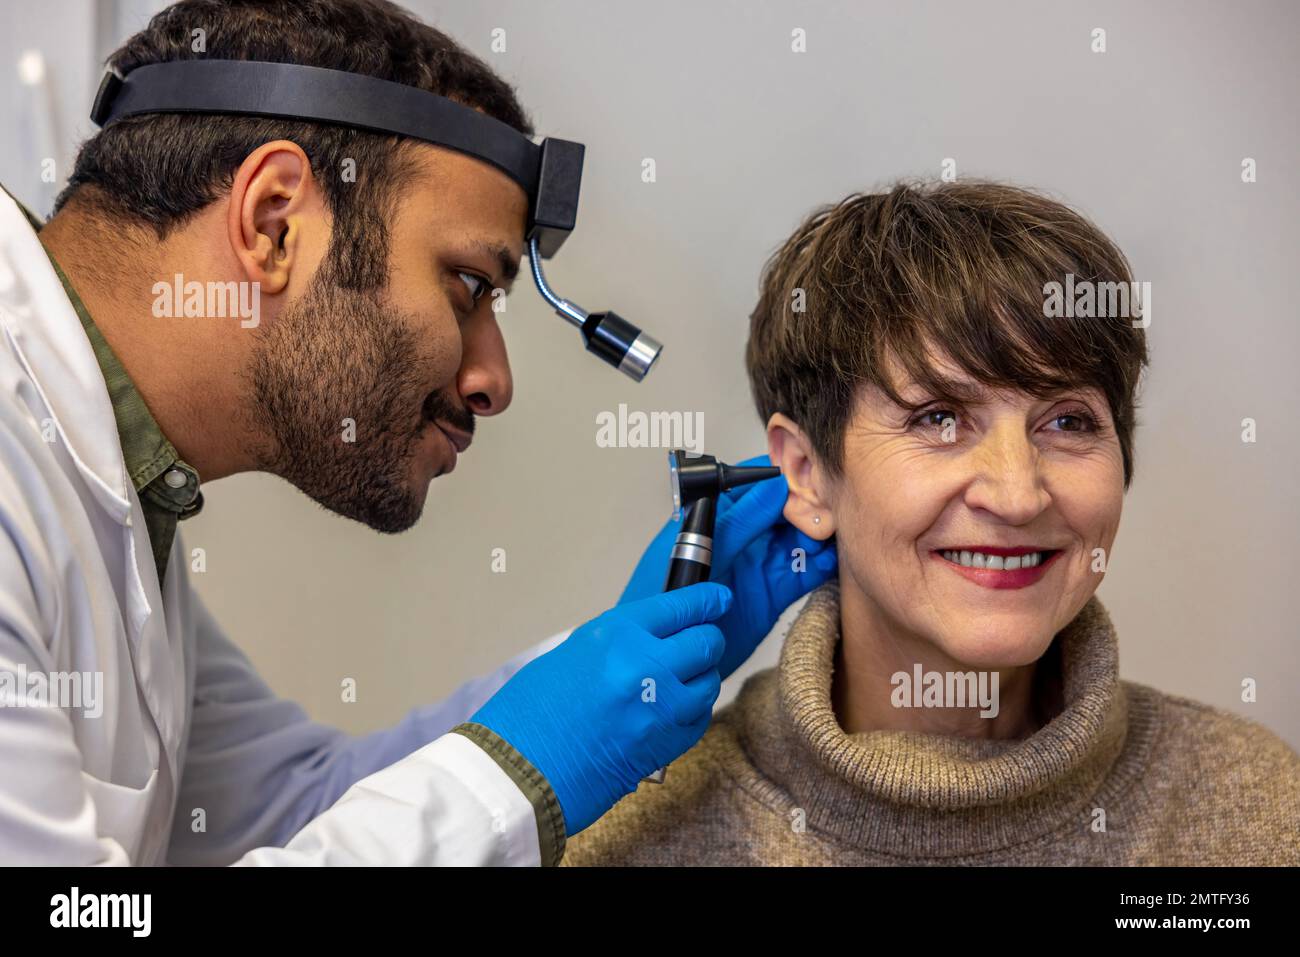 ENT doctor examinine patients ear with endoscope Stock Photo